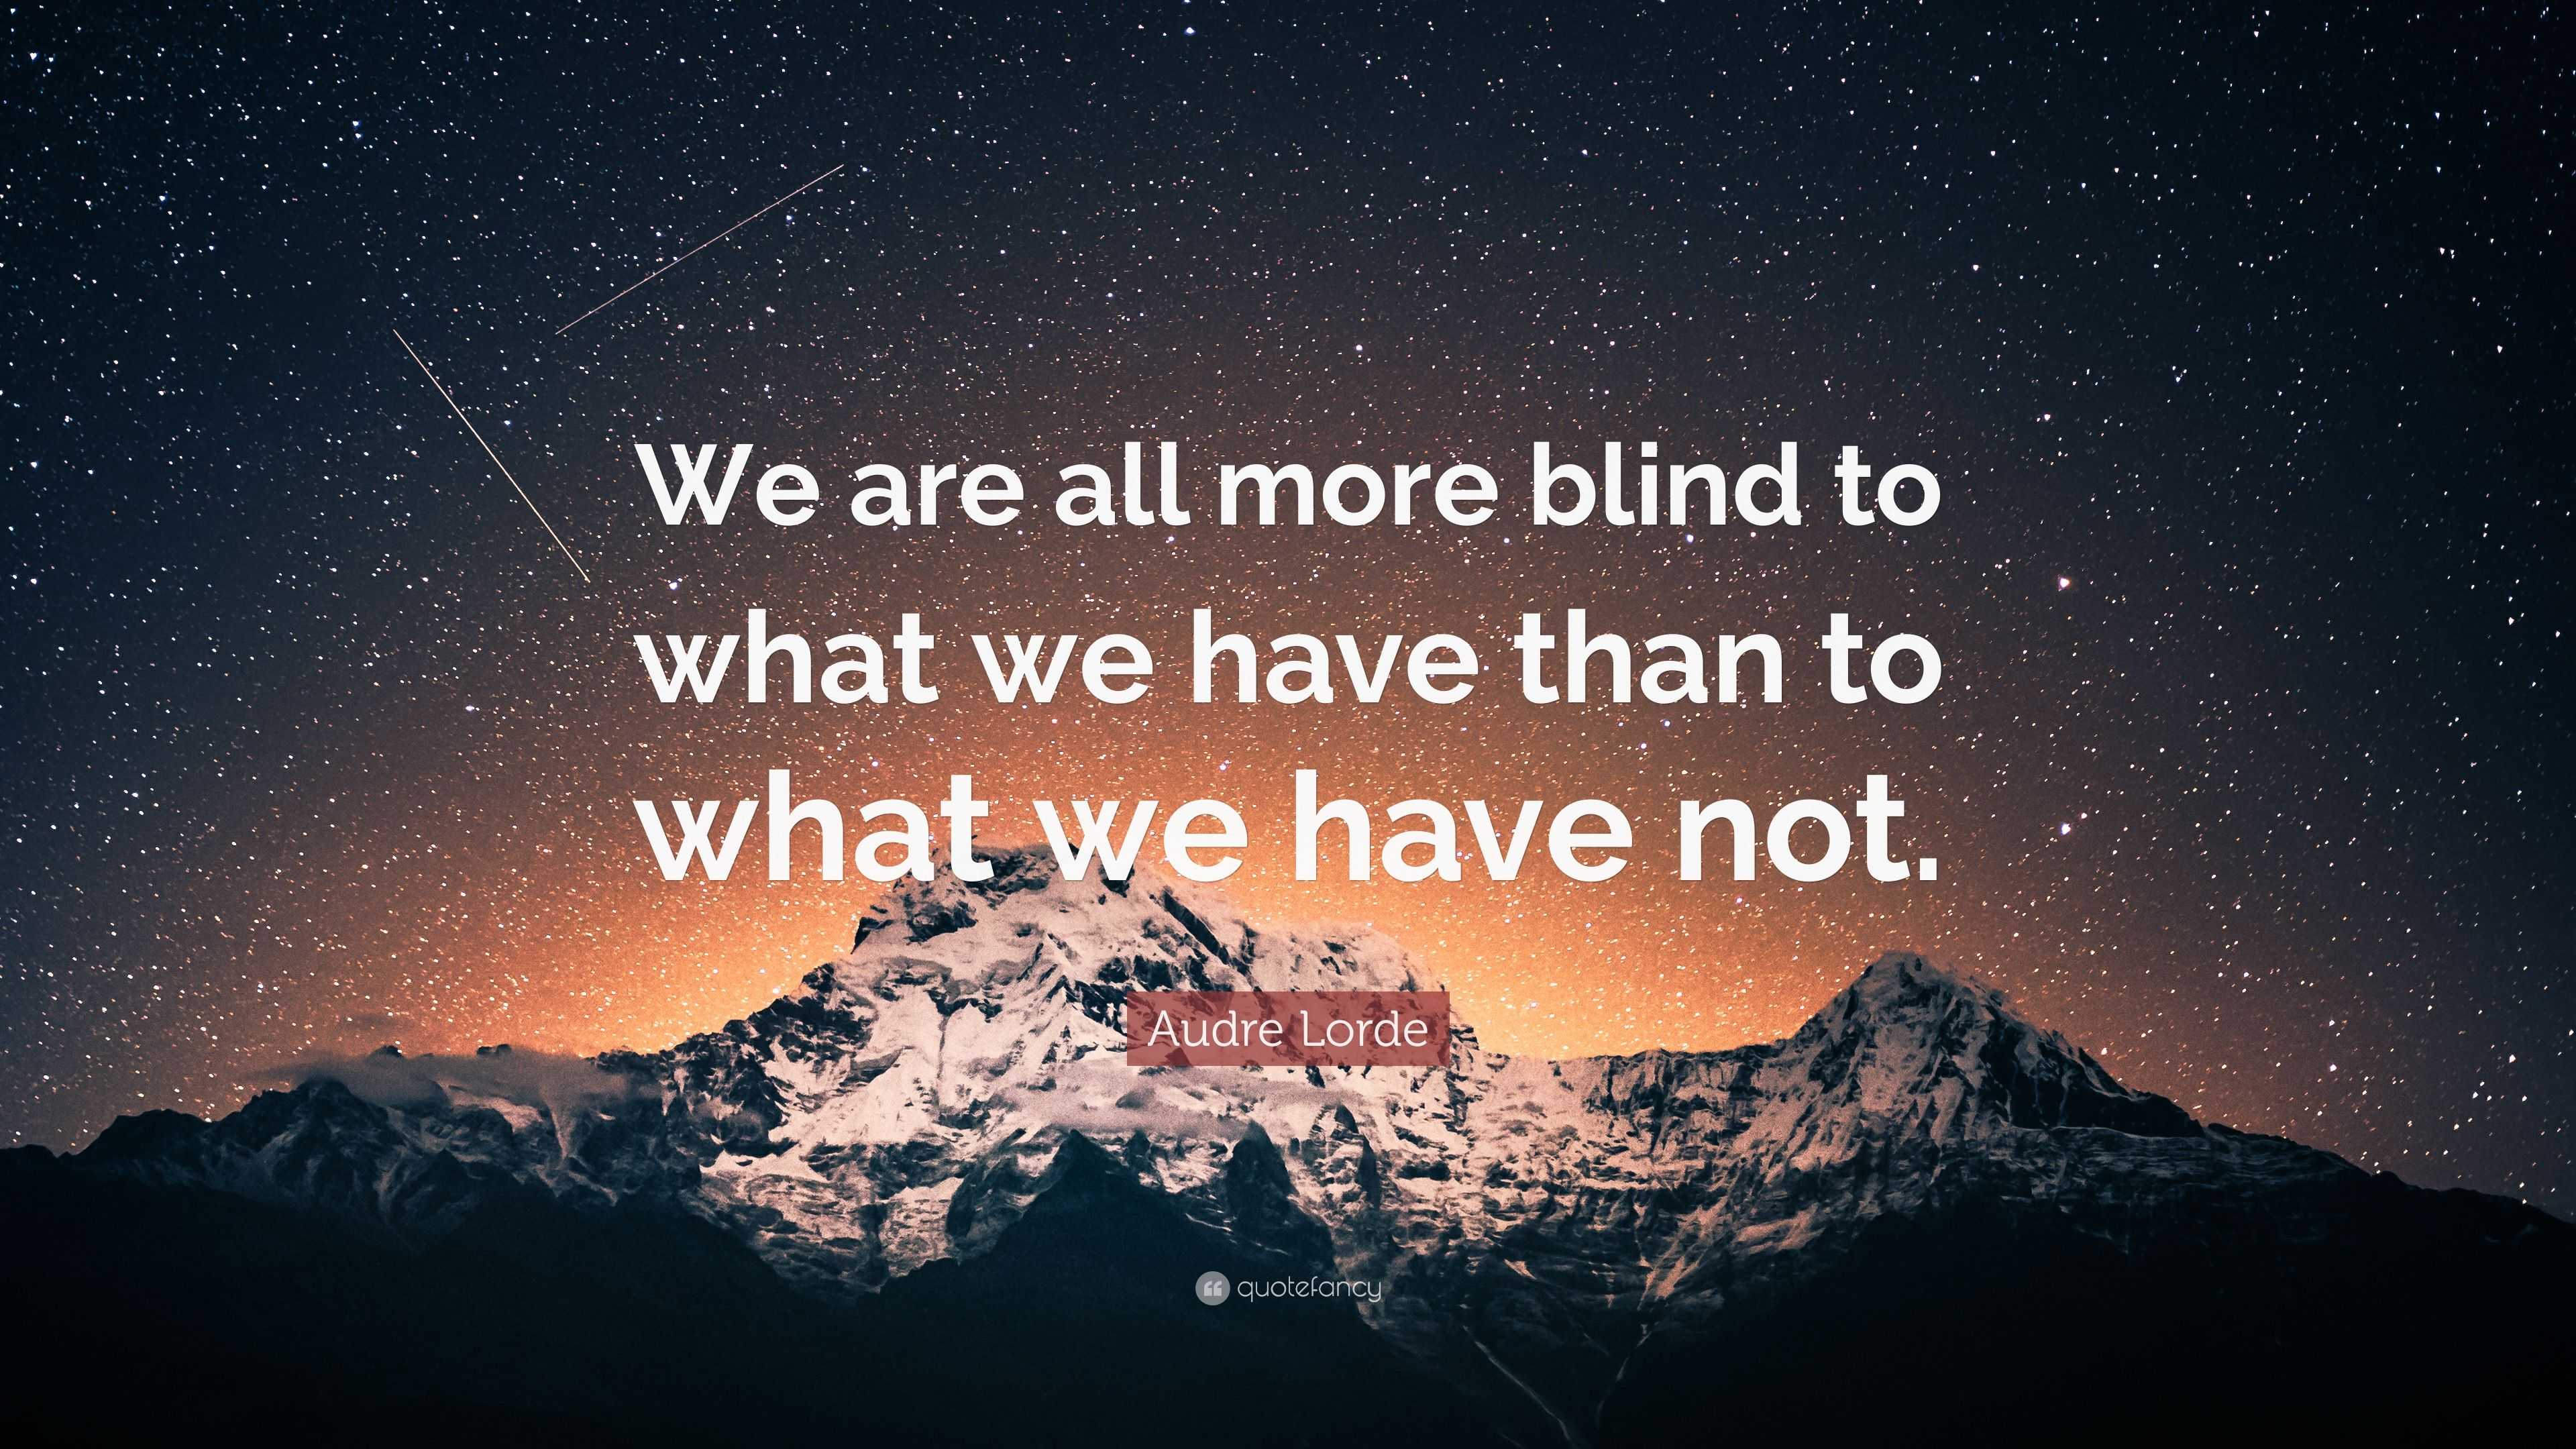 Audre Lorde Quote: “We are all more blind to what we have than to what ...